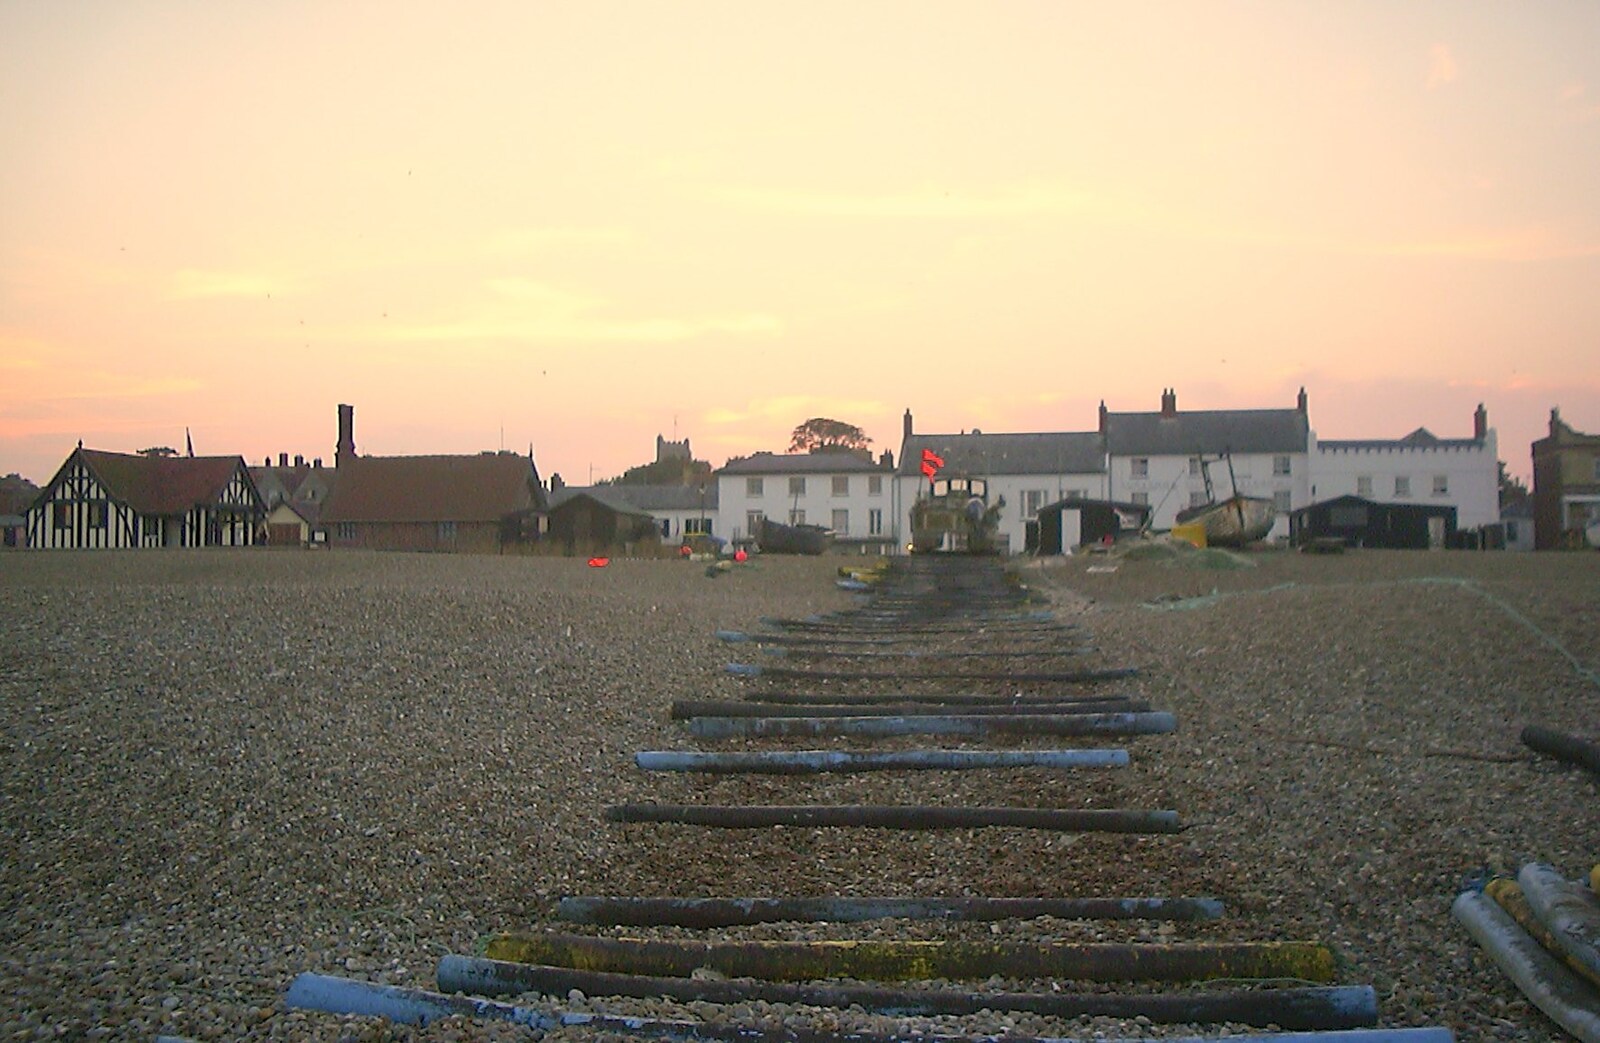 A rudimentary timber slipway down to the sea from Fish and Chips on the Beach, Aldeburgh, Suffolk - 12th September 2003